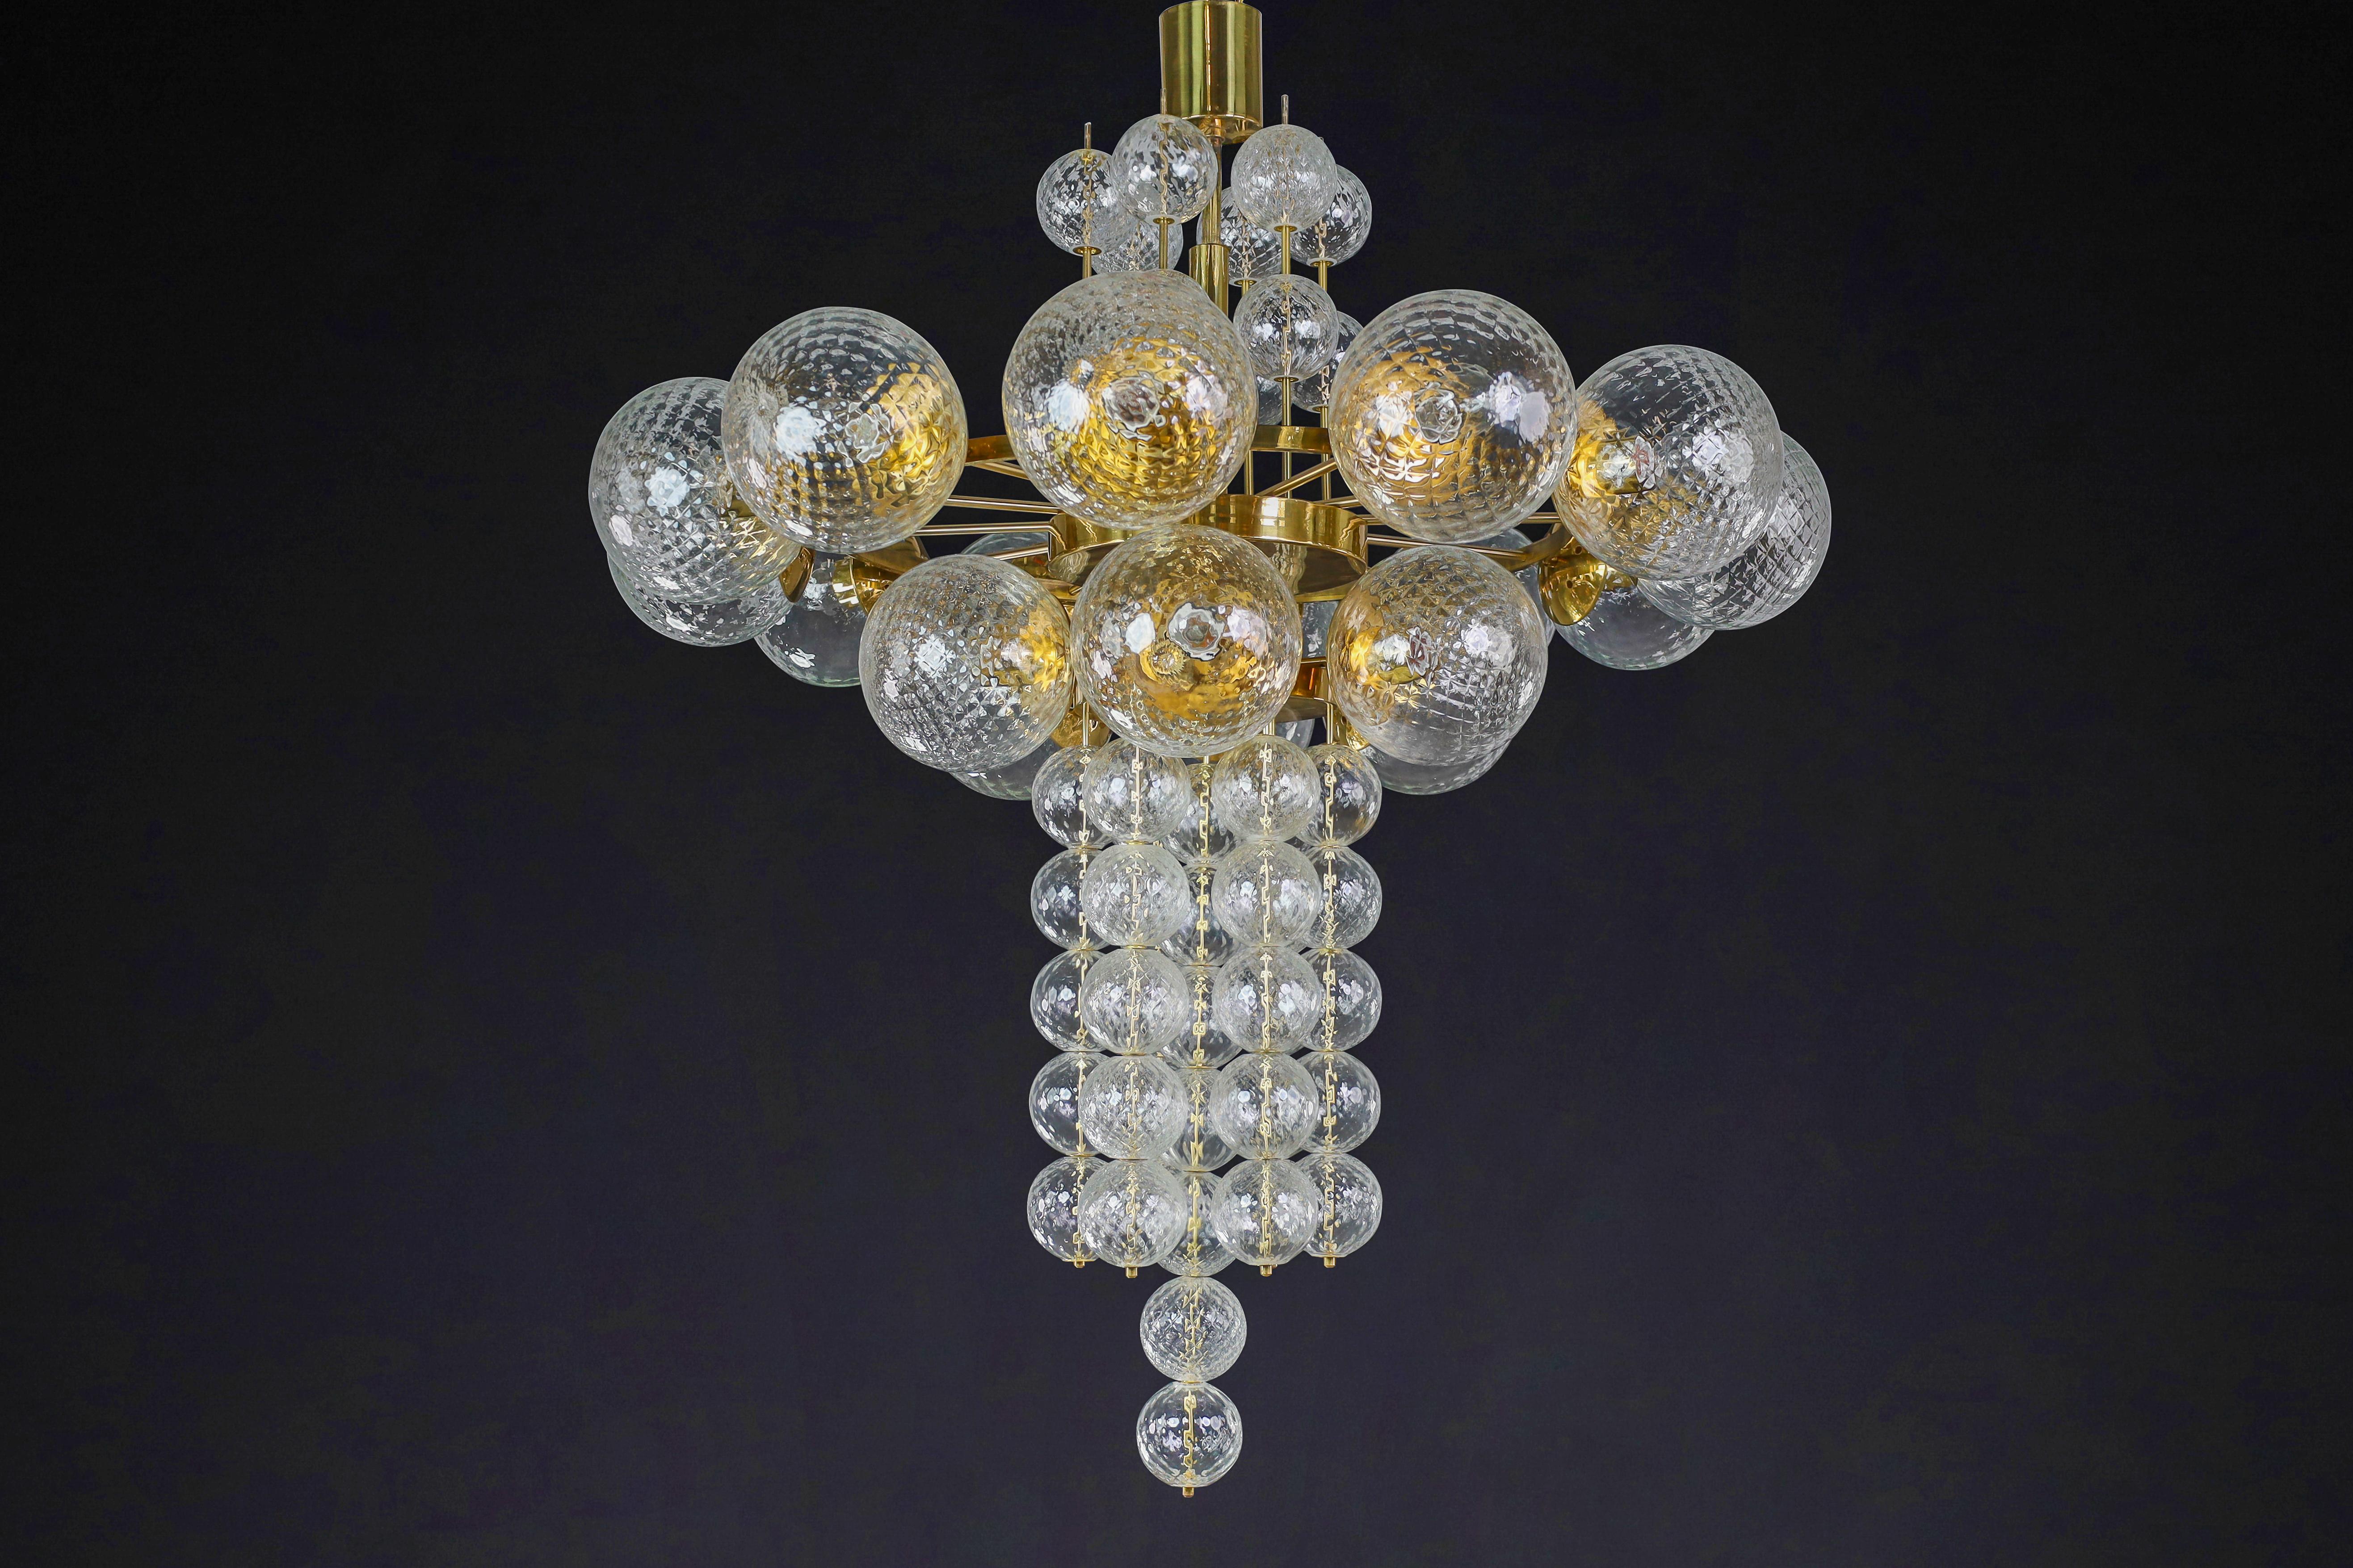 Large Chandelier with brass fixture and hand-blowed glass globes by Preciosa Cz. For Sale 11